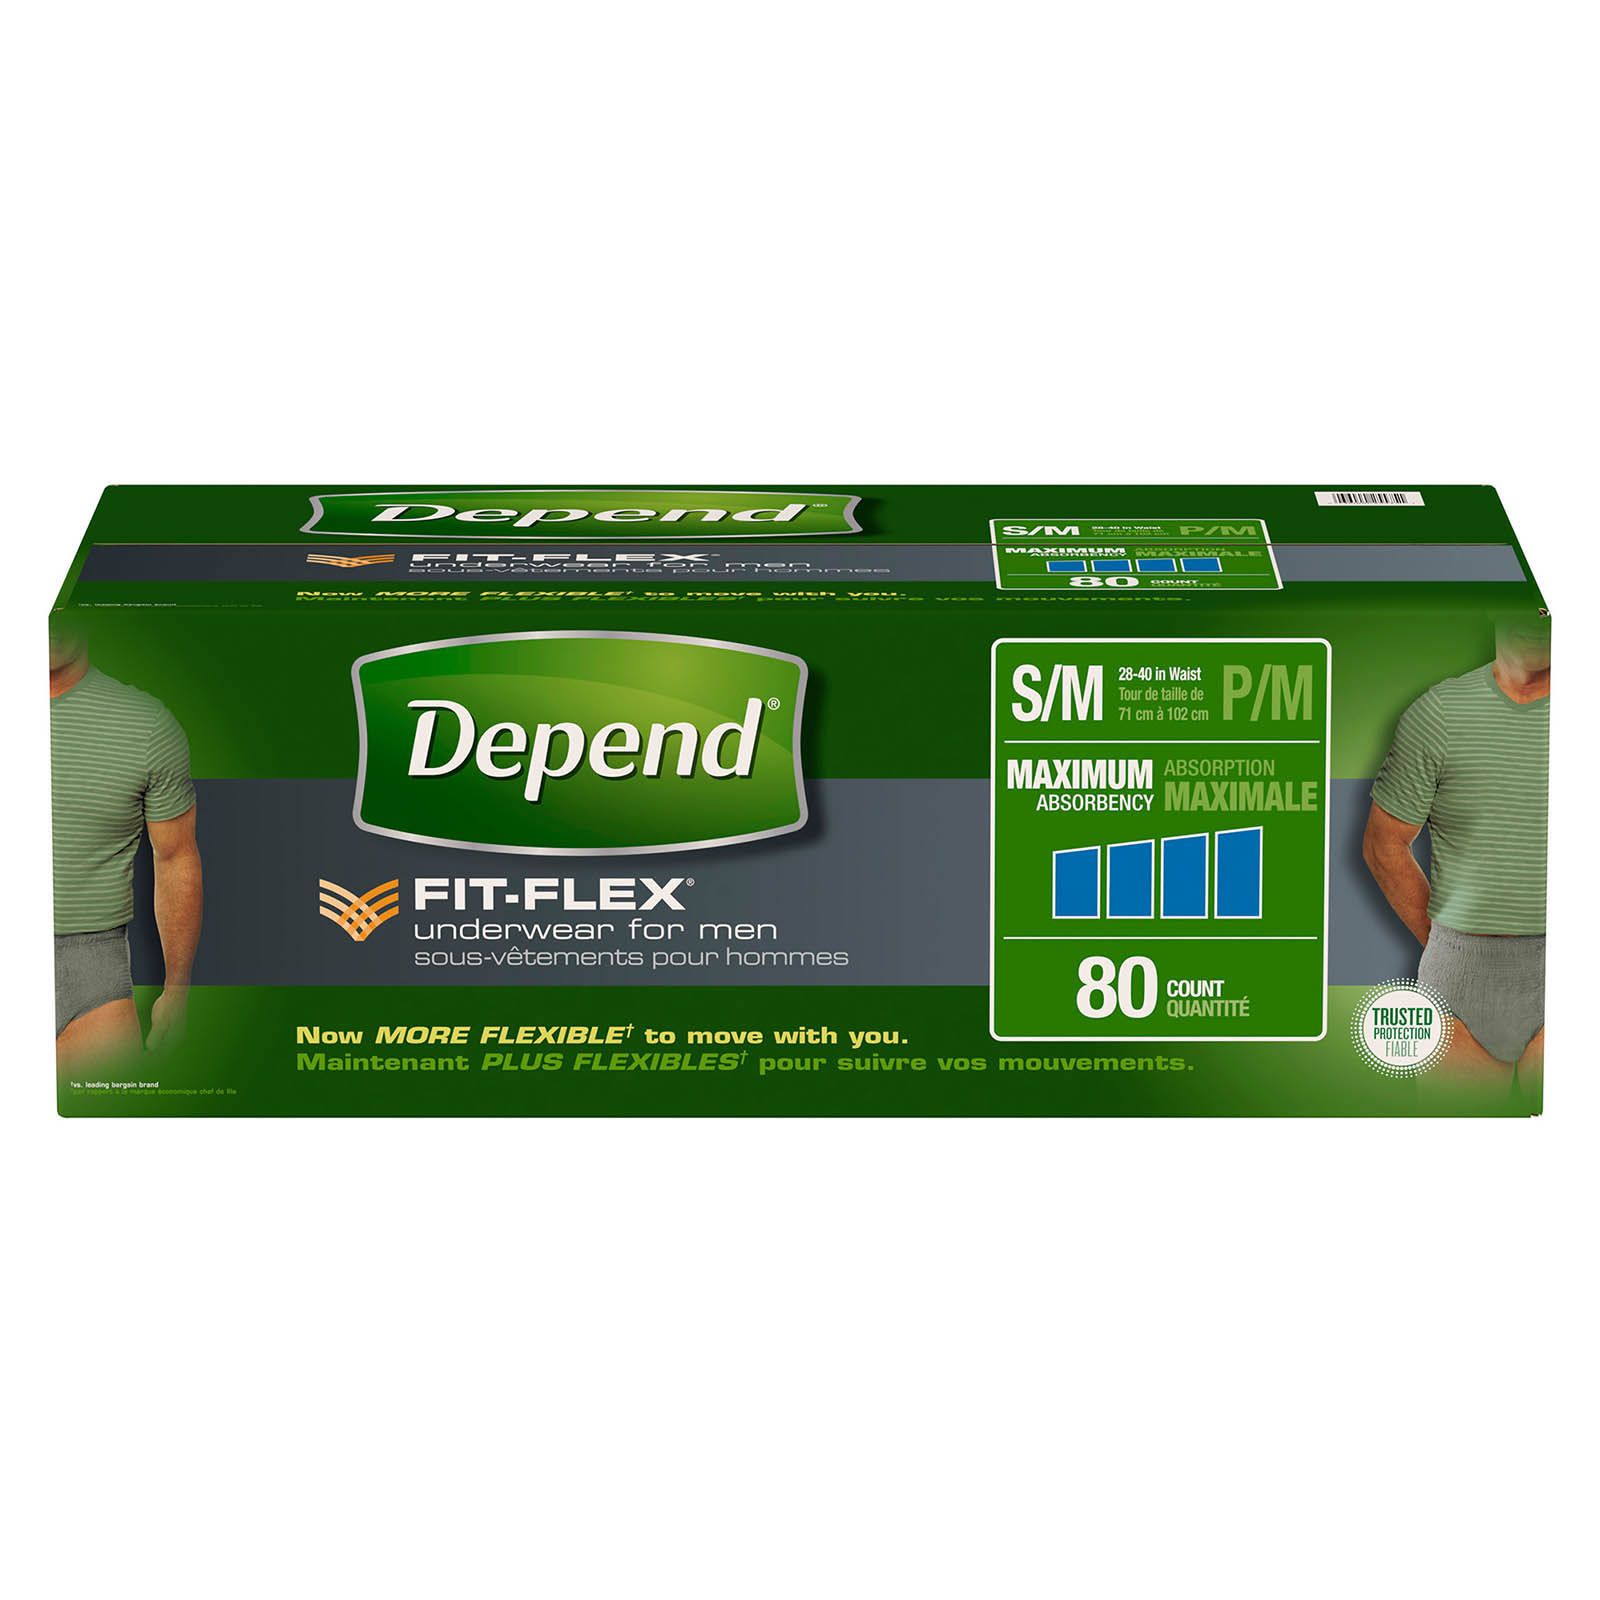 Depend FIT-FLEX Incontinence Underwear for Men with Maximum Absorbency,  Size S/M, 80 ct.